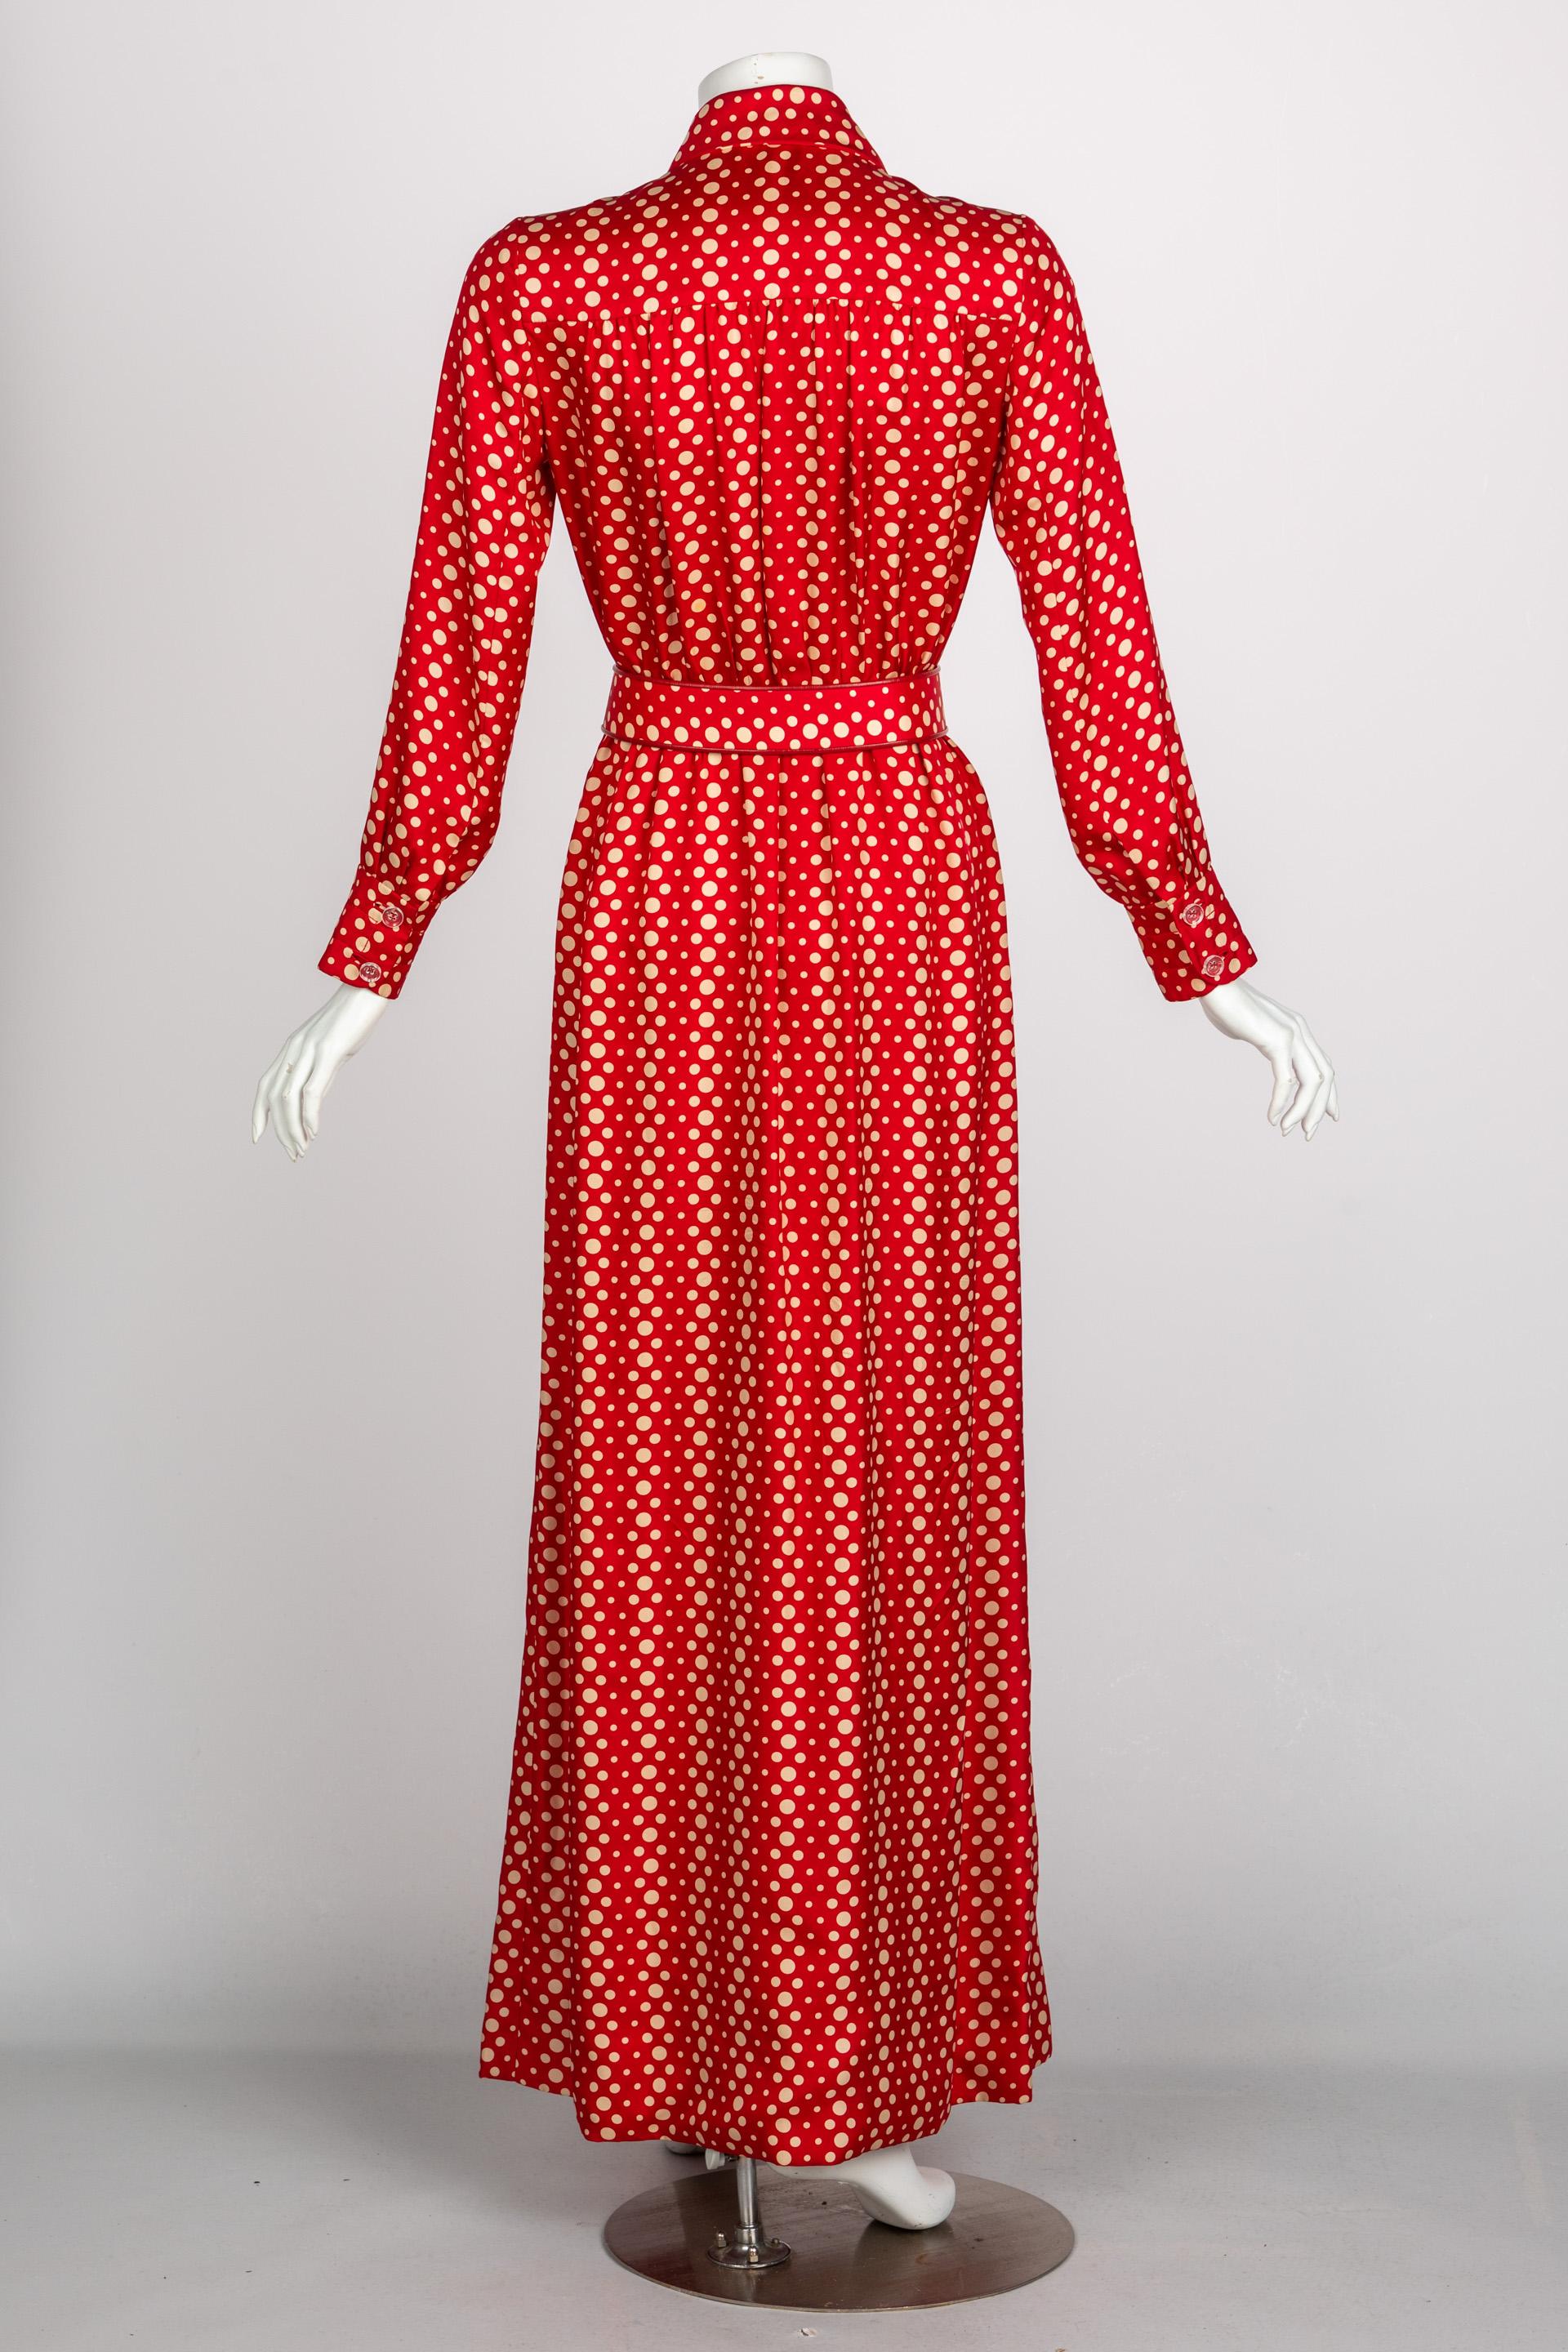 Galanos Red Polka Dot Lucite Belted Silk Maxi Dress, 1970s For Sale 3